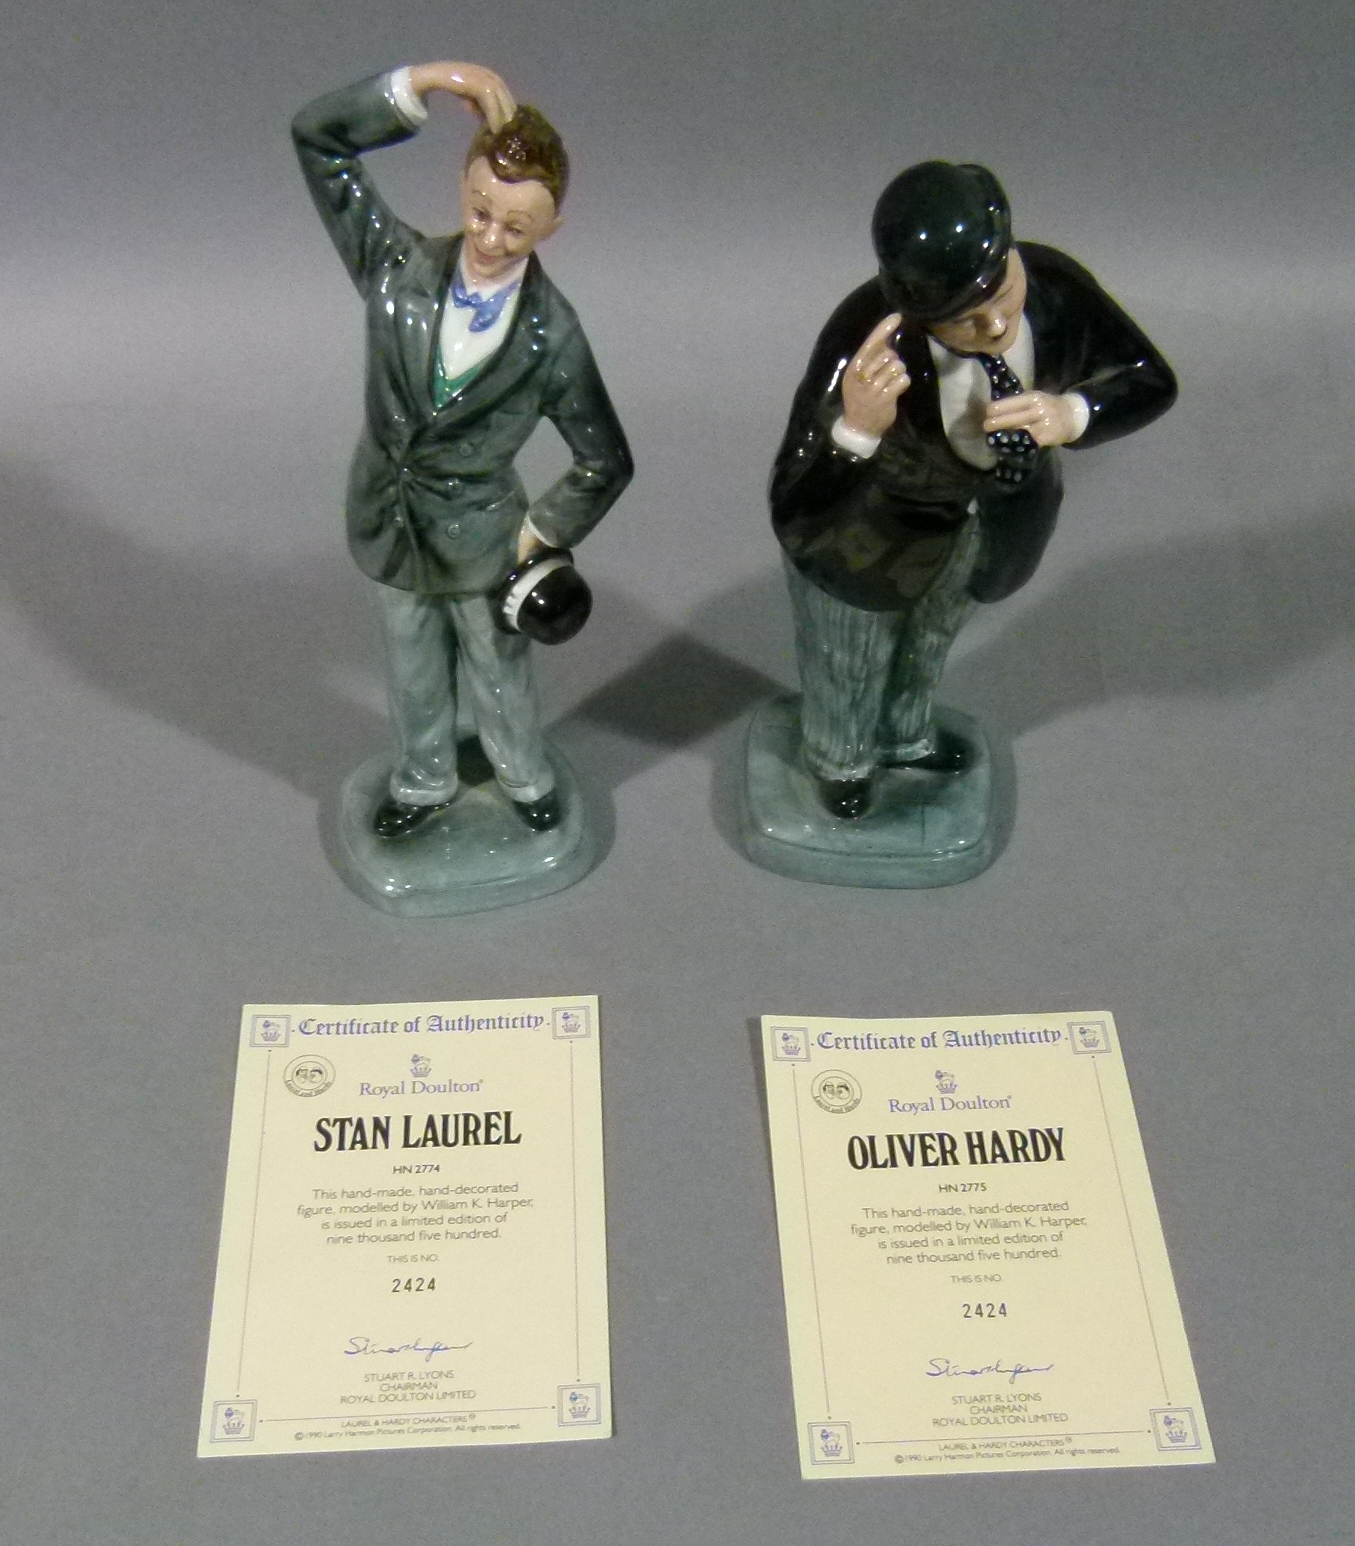 A Royal Doulton limited edition figure of Stan Laurel, number 2424, 24cm high, printed mark in - Image 2 of 4